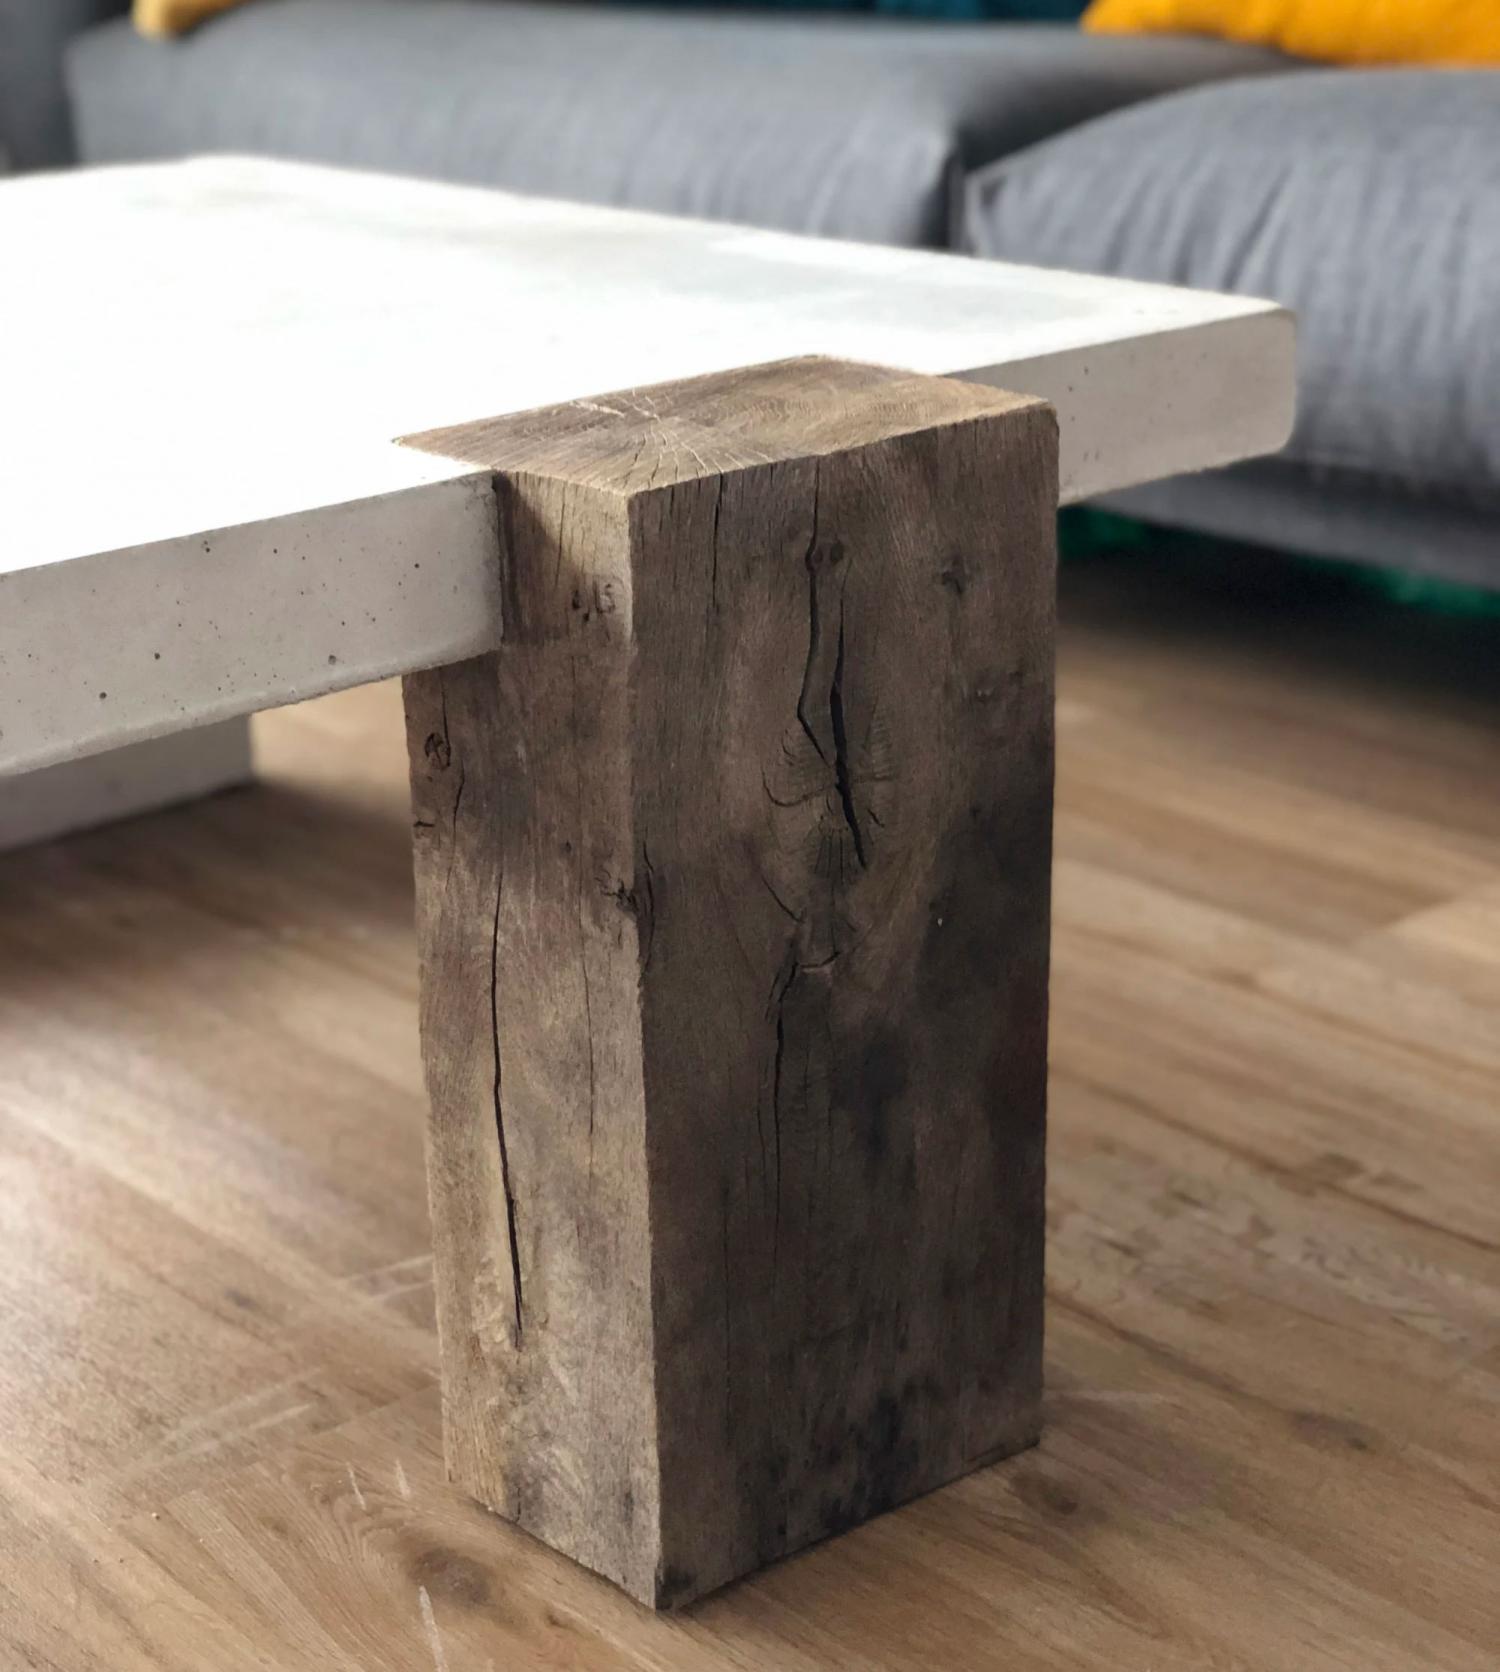 White ceramic concrete coffee table with a wooden block leg on a brown wooden floor